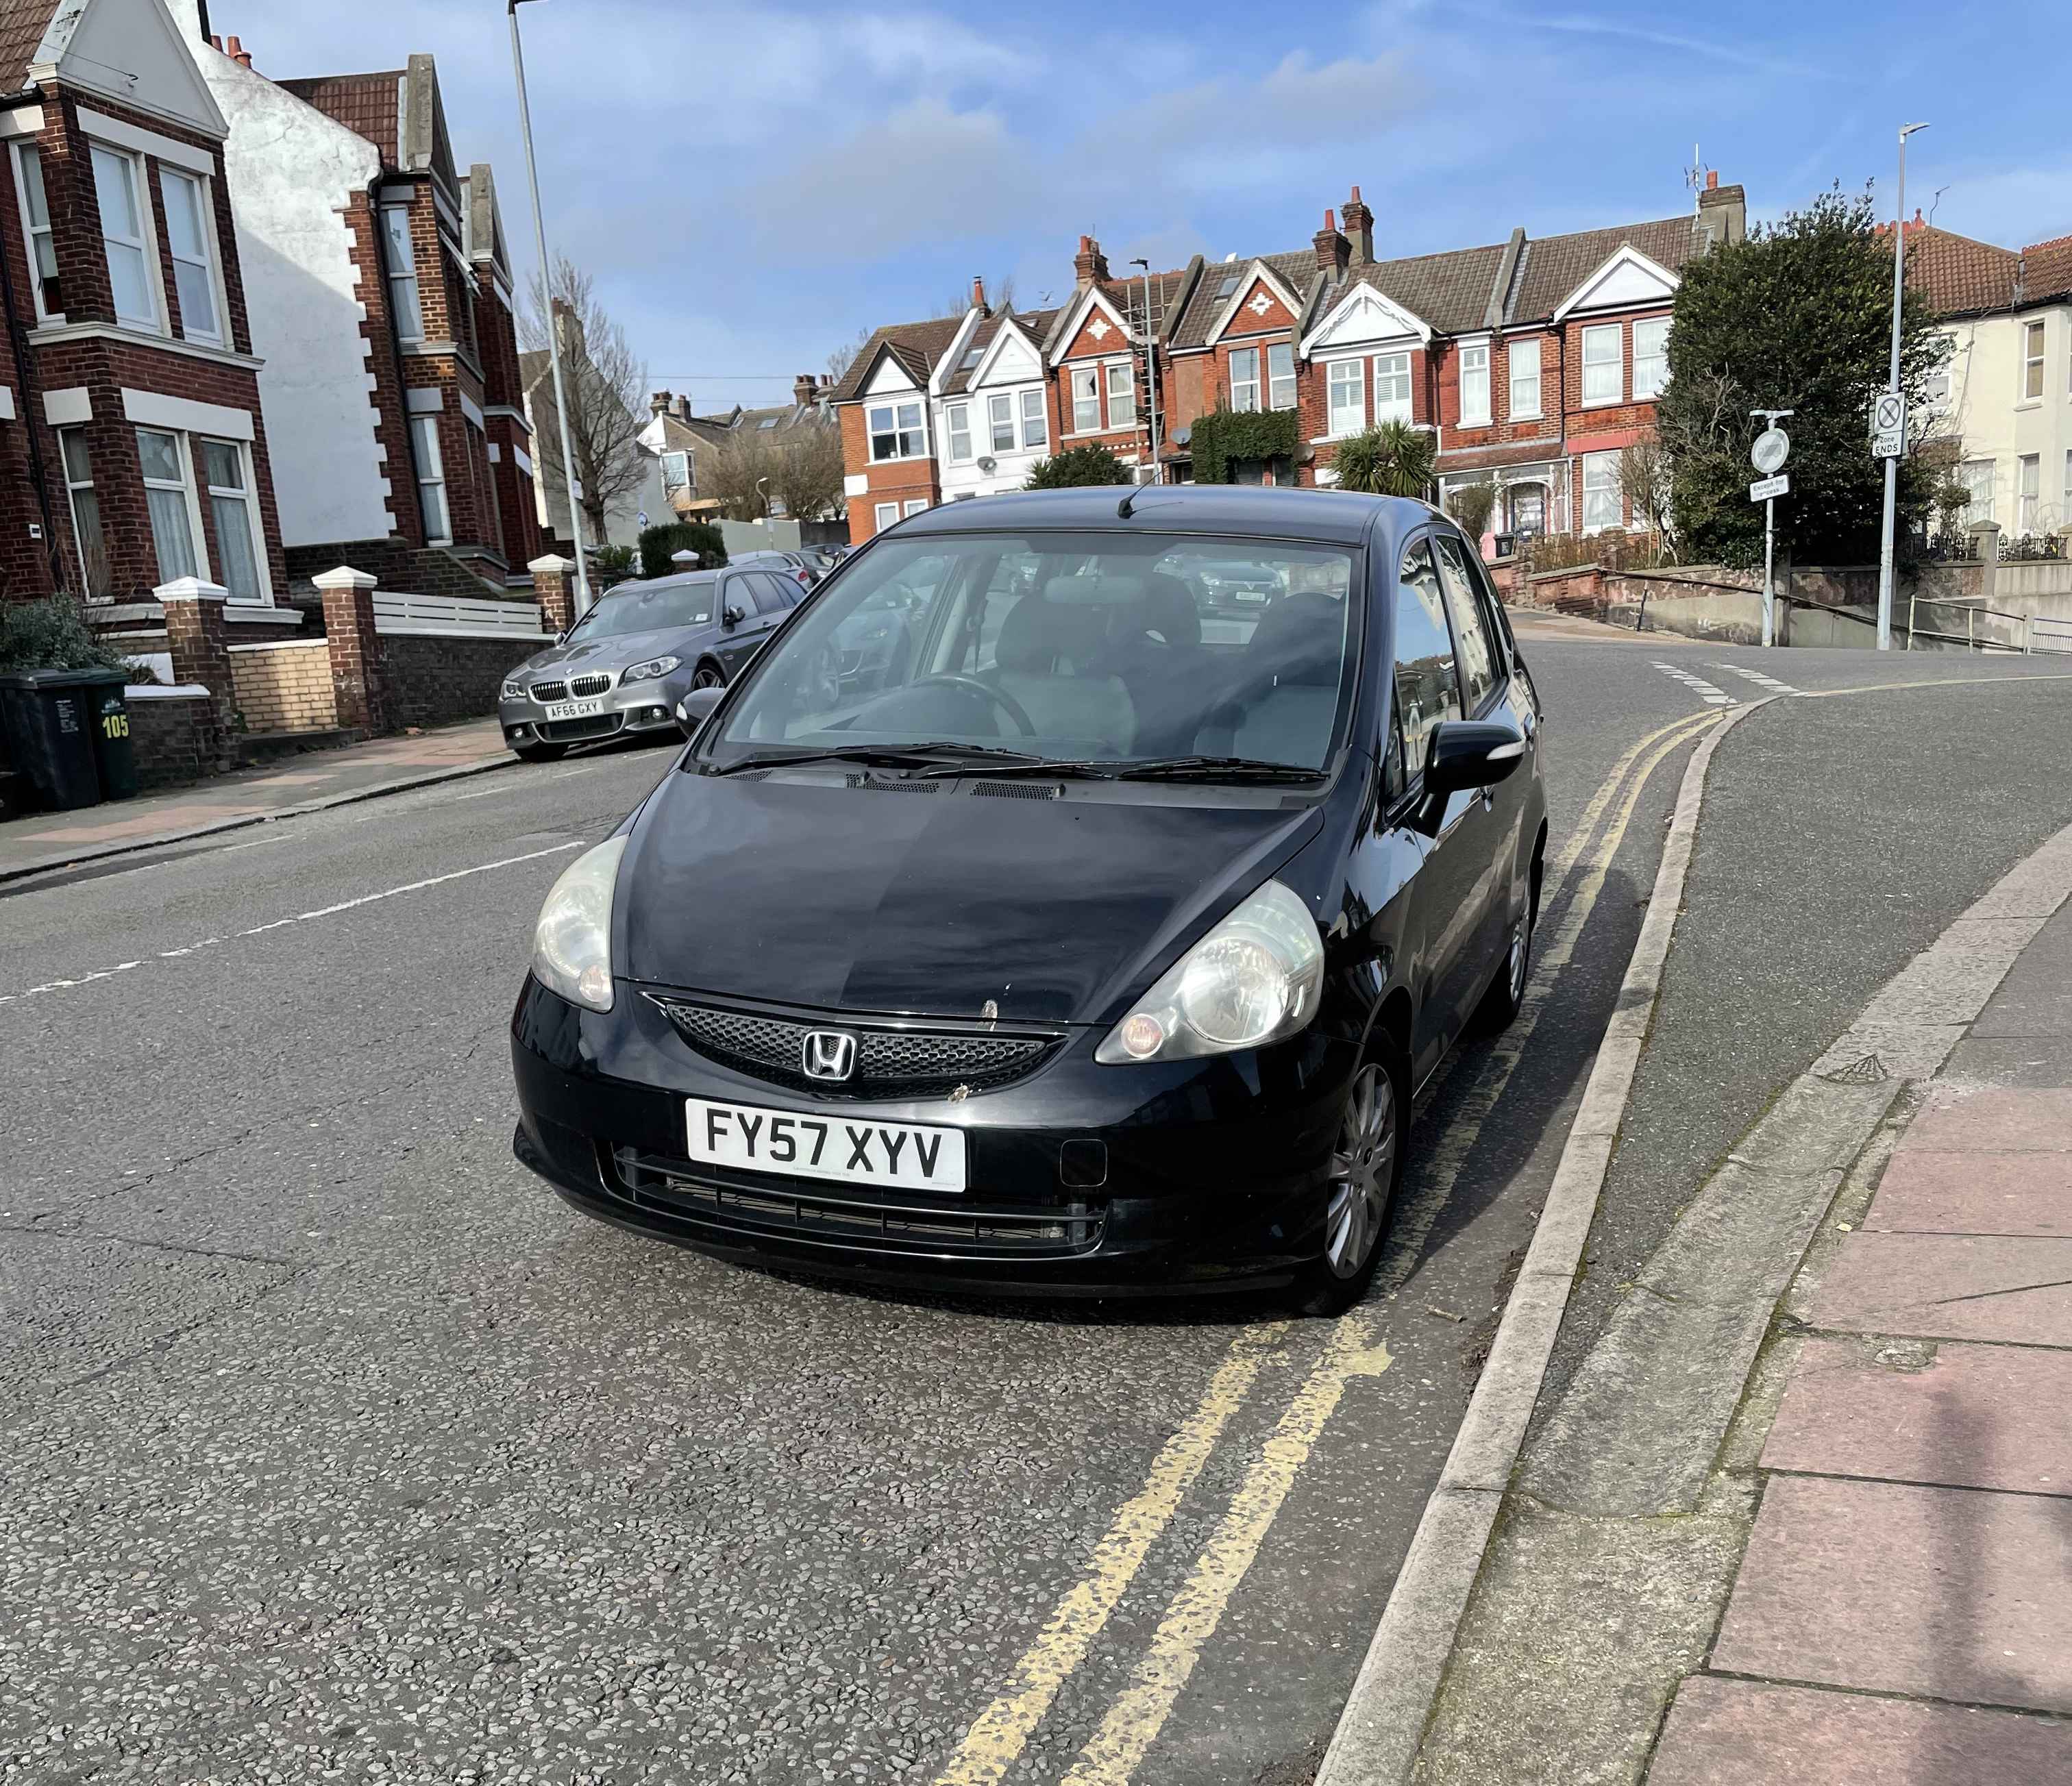 Photograph of FY57 XYV - a Black Honda Jazz parked in Hollingdean by a non-resident. 